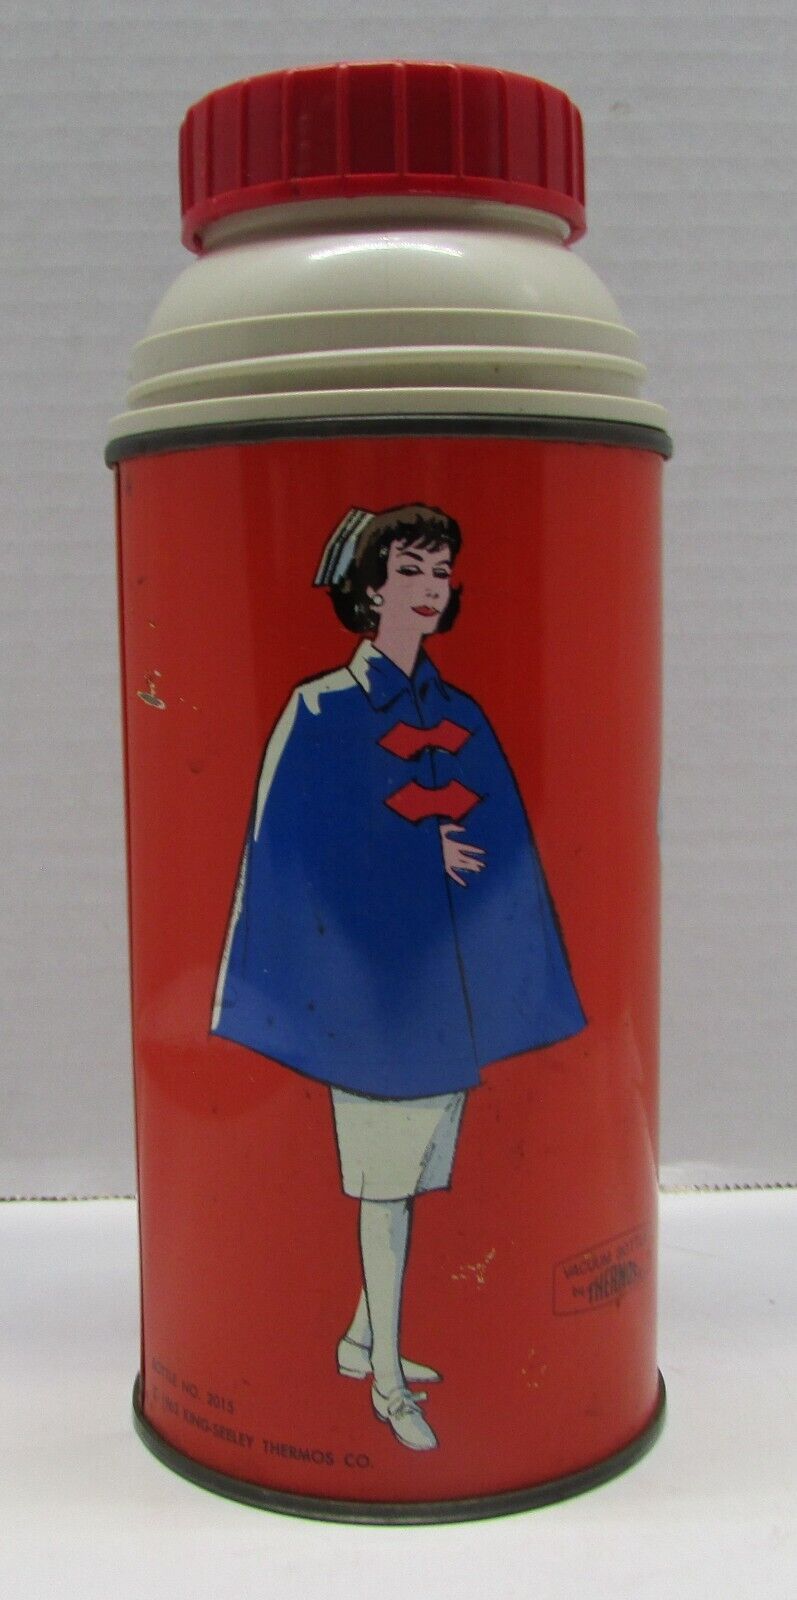 ANTIQUE KING SEELY BRAND No. 2015 THERMOS WITH JUNIOR NURSE DESIGN 1963